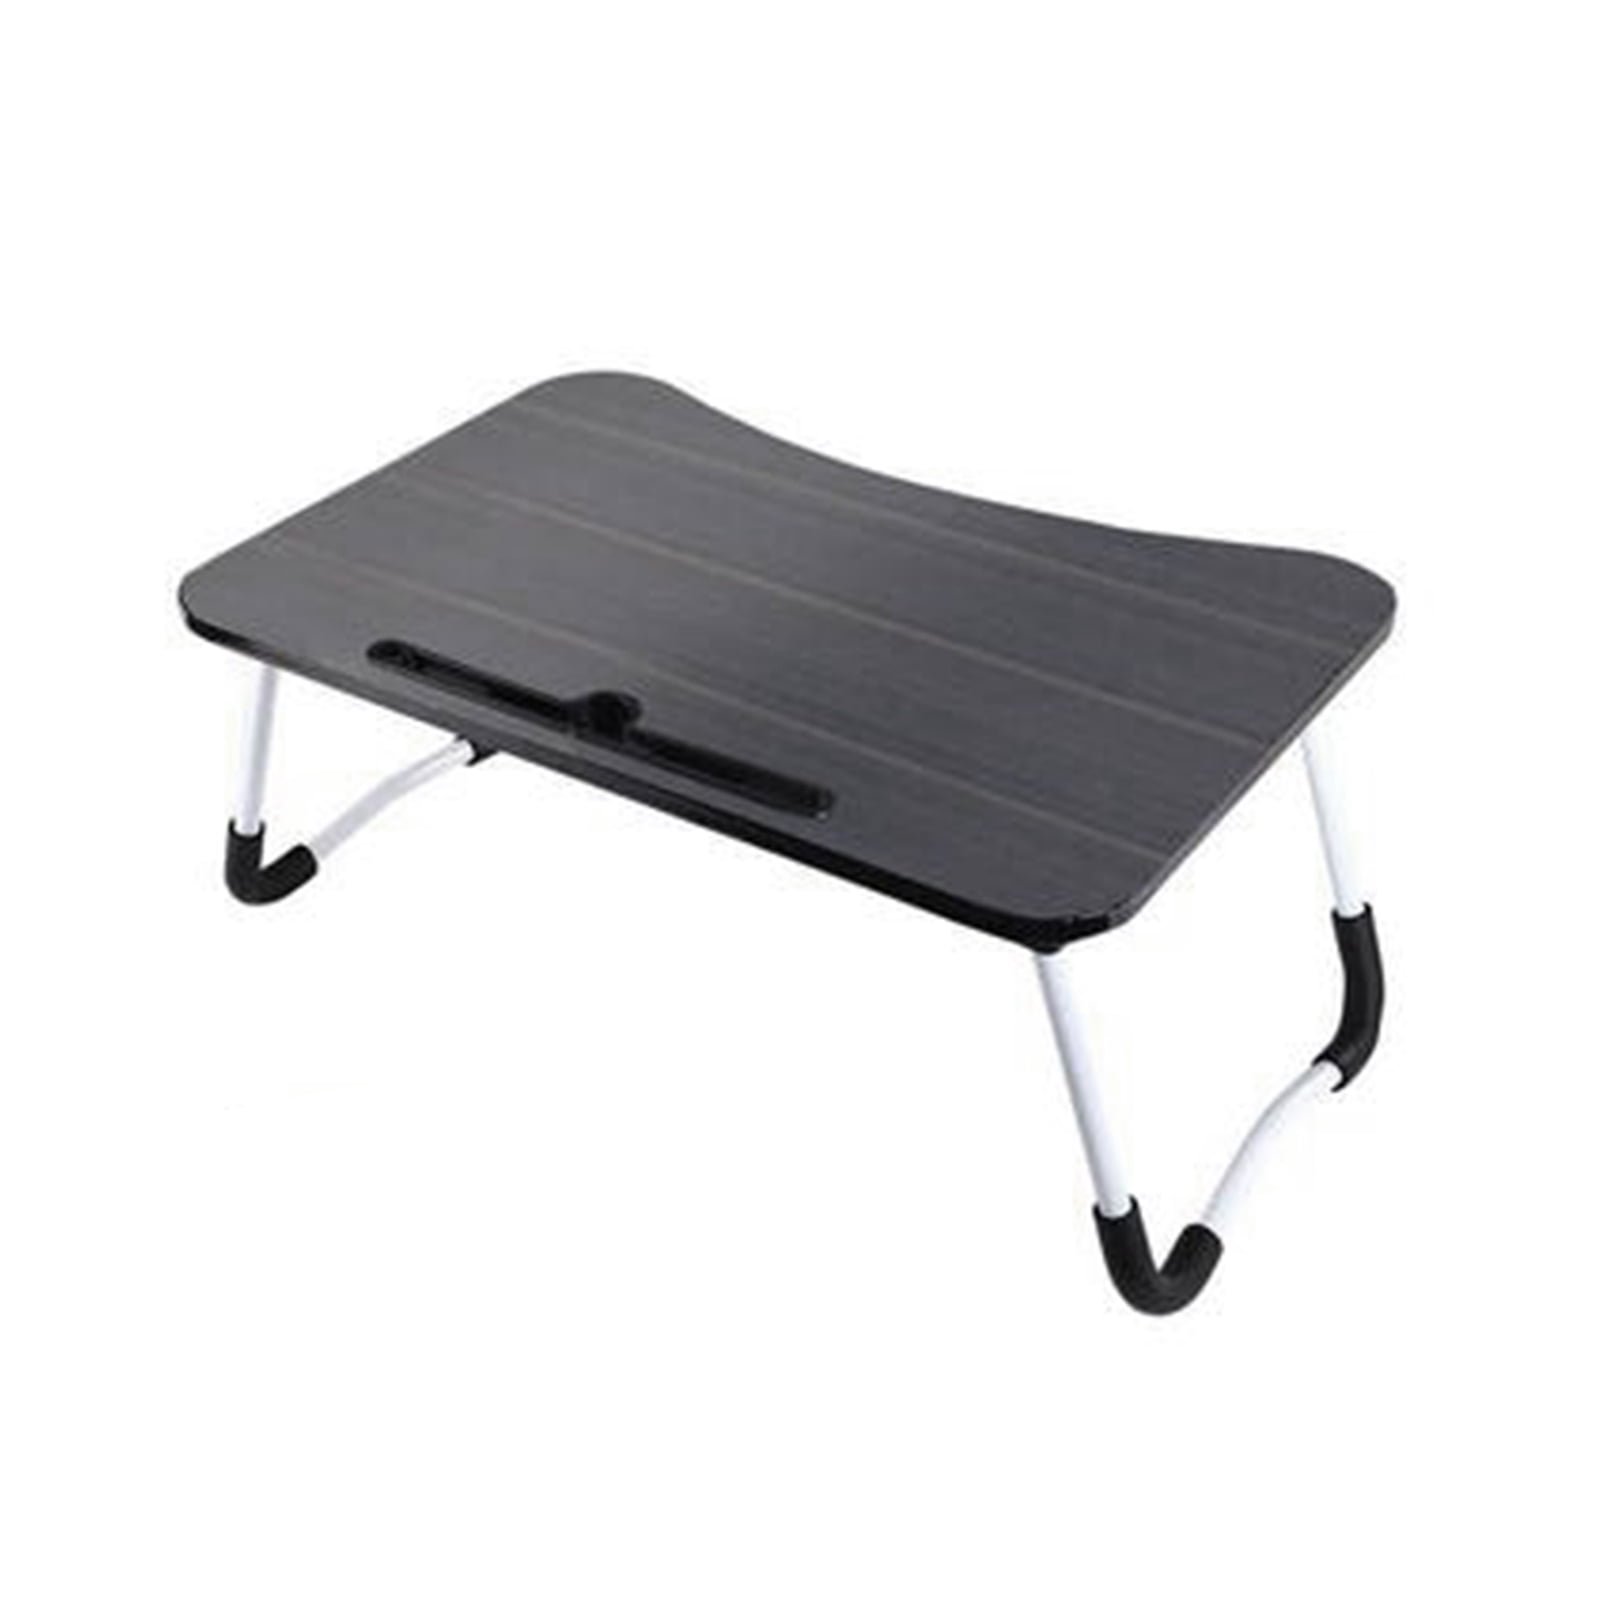 Laptop Desk Foldable Bed Table Portable Multi-Function Lap Bed Tray Table with Storage Drawer and Cup Slot Bed Notebook Stand Breakfast Bed Tray for Sofa Terrace Balcony Garden 